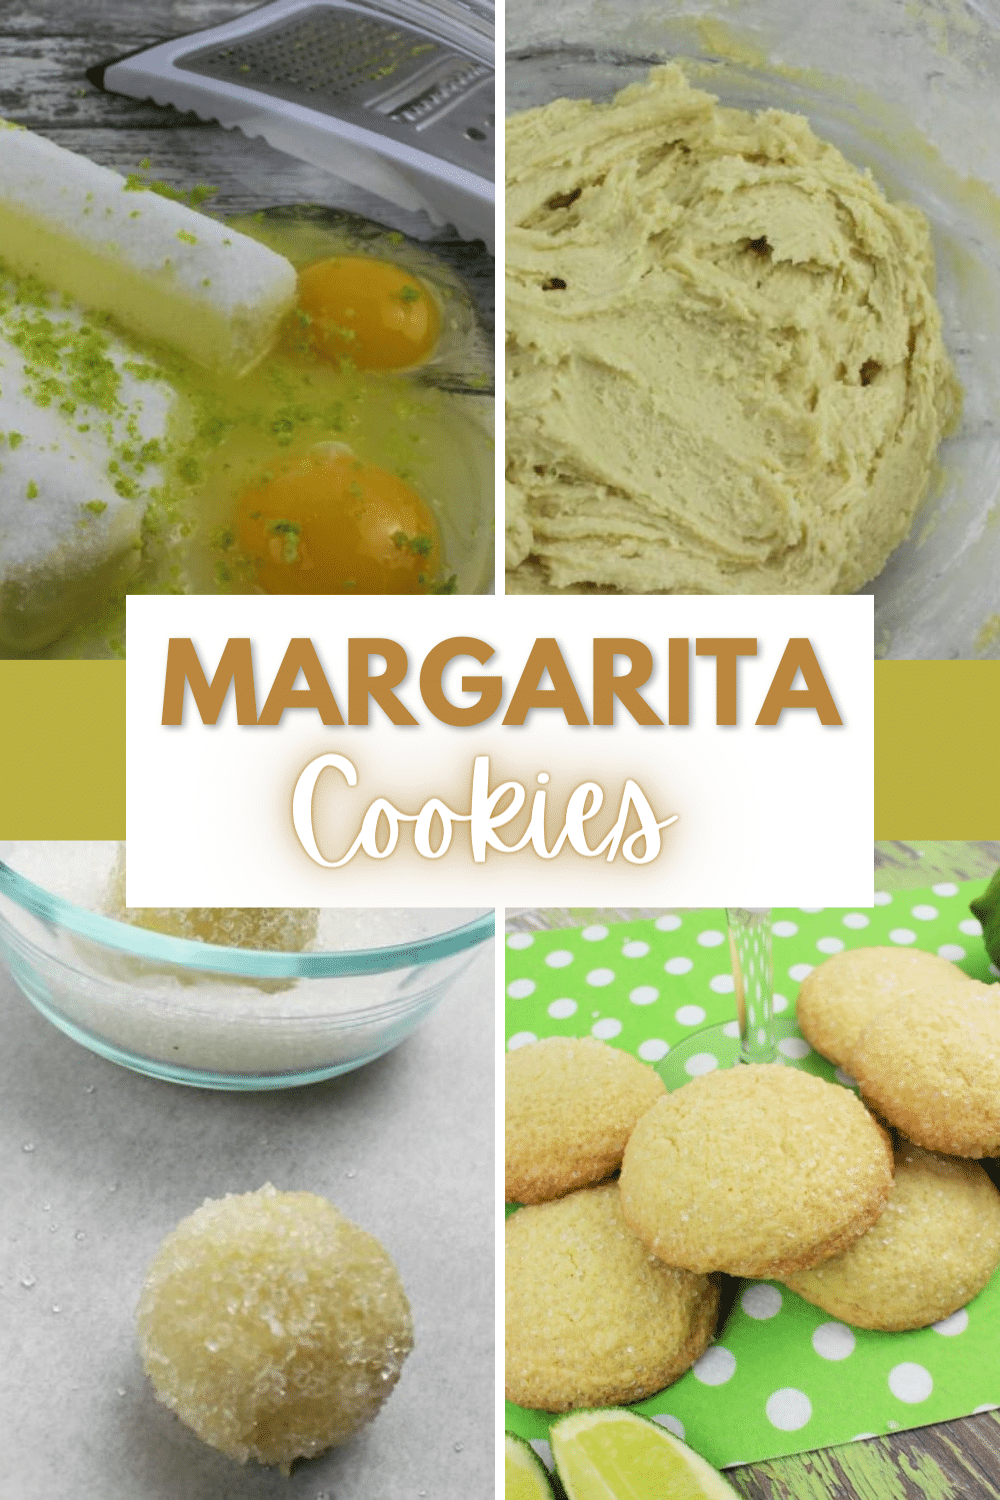 These Margarita Cookies have the tang of lime juice and the kick of tequila. This flavorful combination is the perfect Cinco de Mayo dessert. #margaritacookies #limecookies #tequila #recipe #cookierecipe via @wondermomwannab